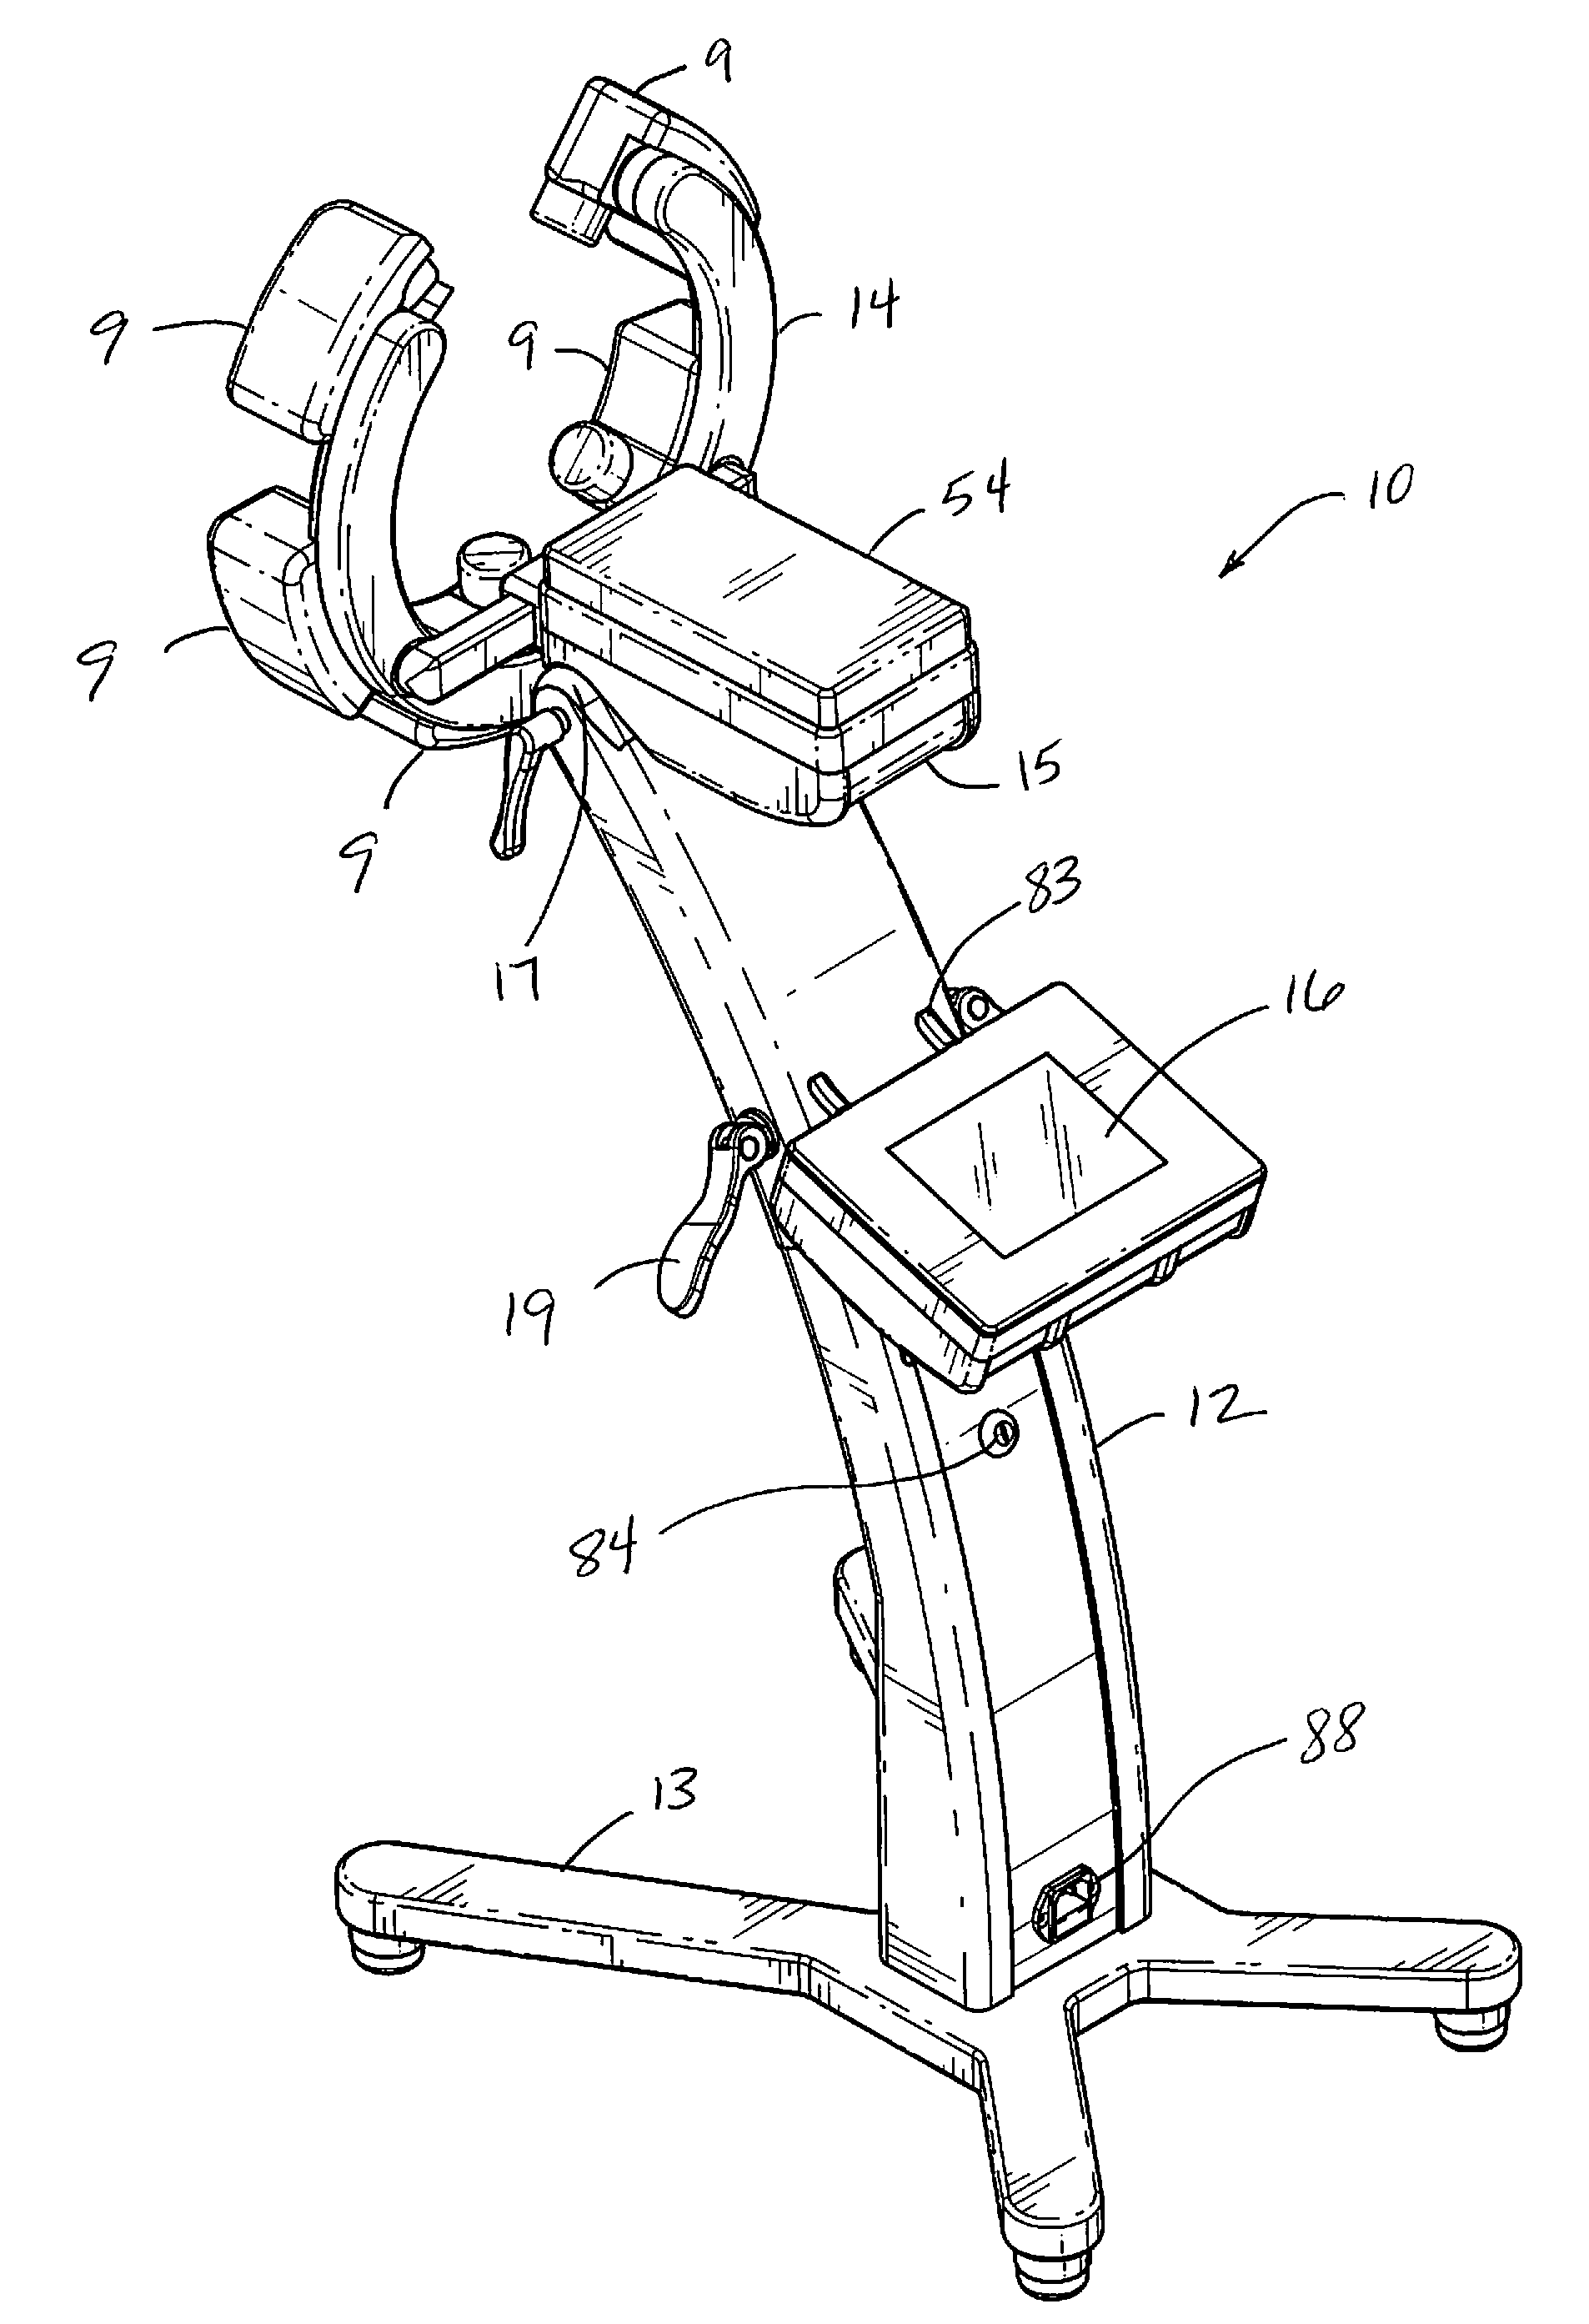 Low Level Laser Therapy Device with Open Bore